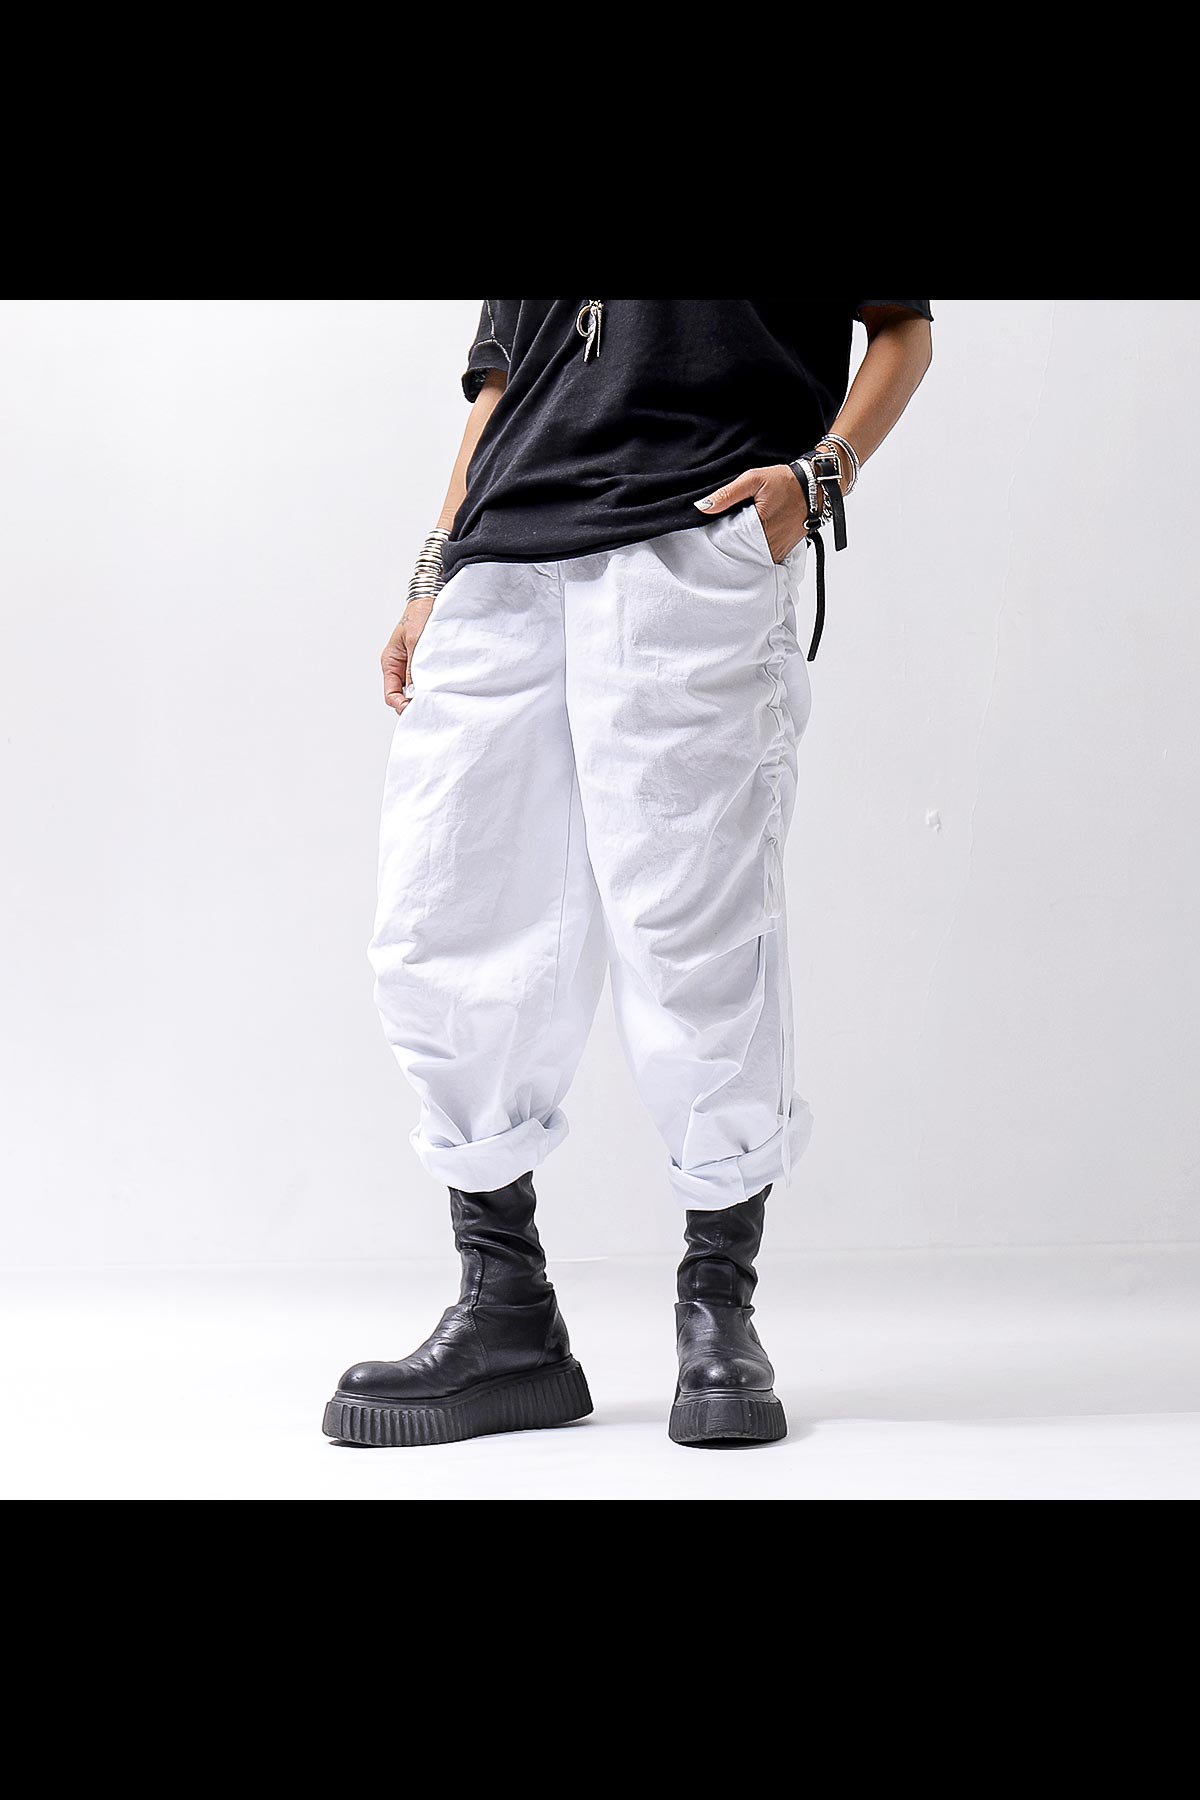 <img class='new_mark_img1' src='https://img.shop-pro.jp/img/new/icons8.gif' style='border:none;display:inline;margin:0px;padding:0px;width:auto;' />UNISEX SIDE STRING CODE PANTS 319/MM_PURE WHITE